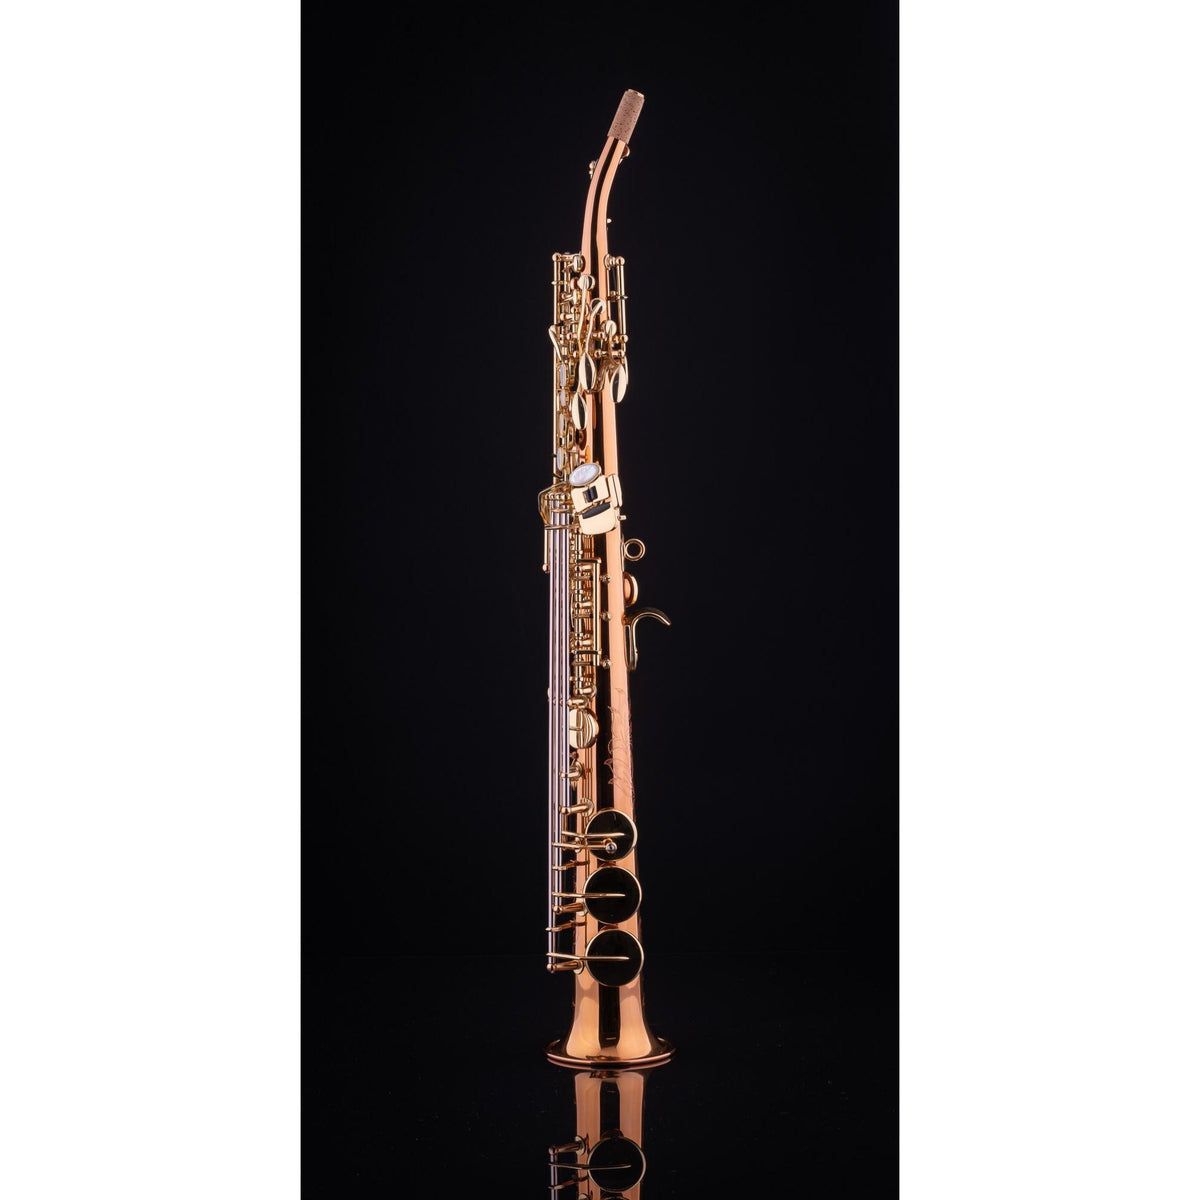 Schagerl - Superior Series - S-2 Soprano Saxophones-Saxophone-Schagerl-Curved-Lacquered-Music Elements